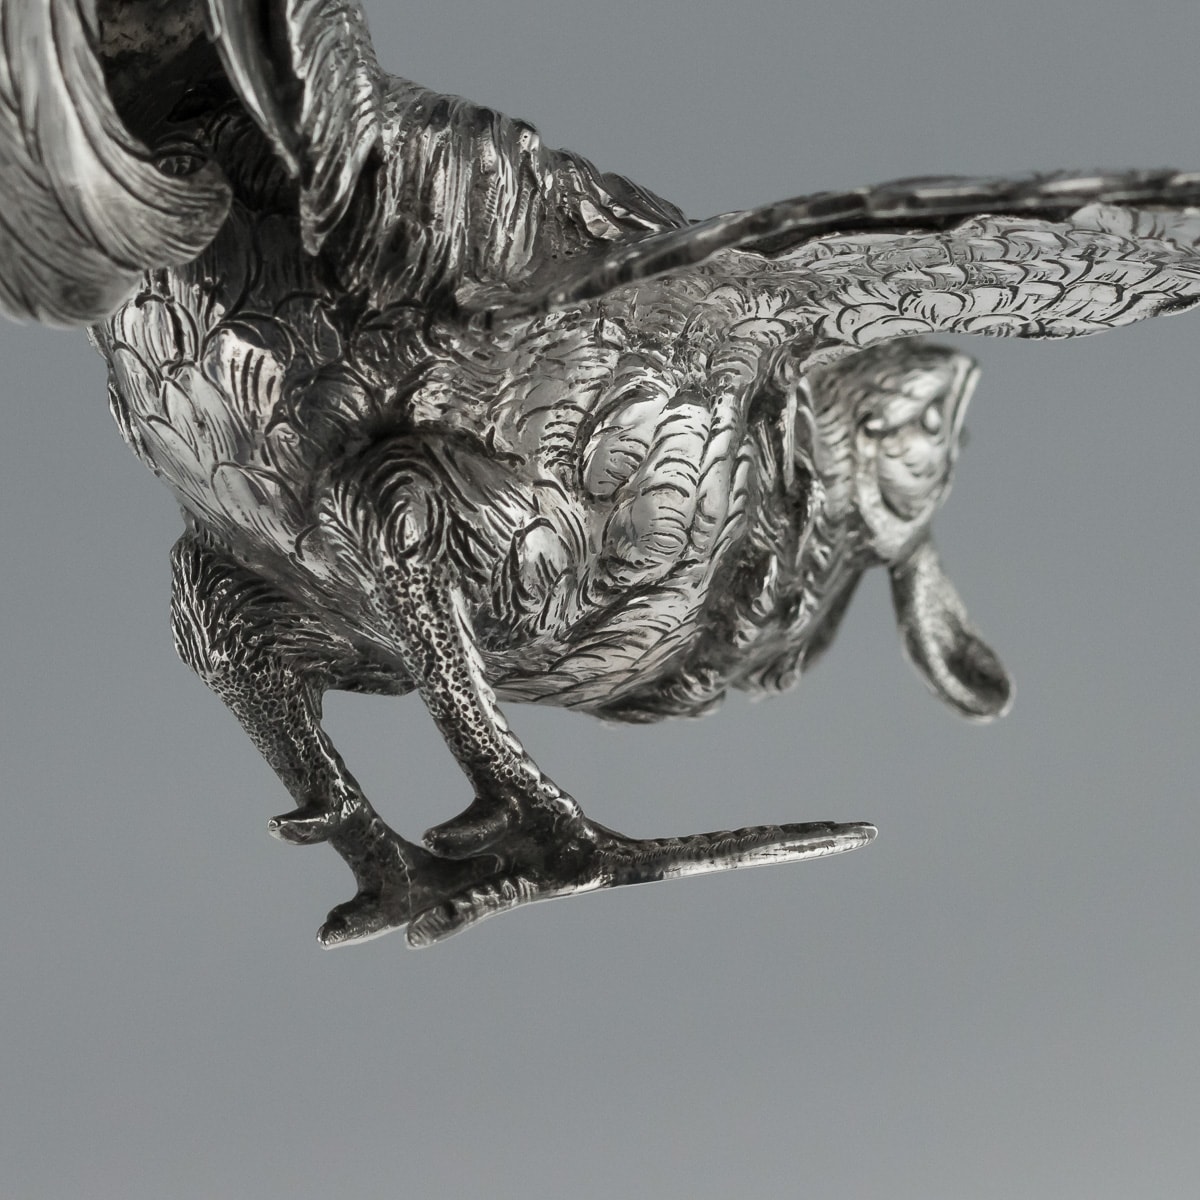 A PAIR OF GERMAN SILVER TABLE ORNAMENTS MODELLED AS FIGHTING COCKERELS - Image 21 of 41